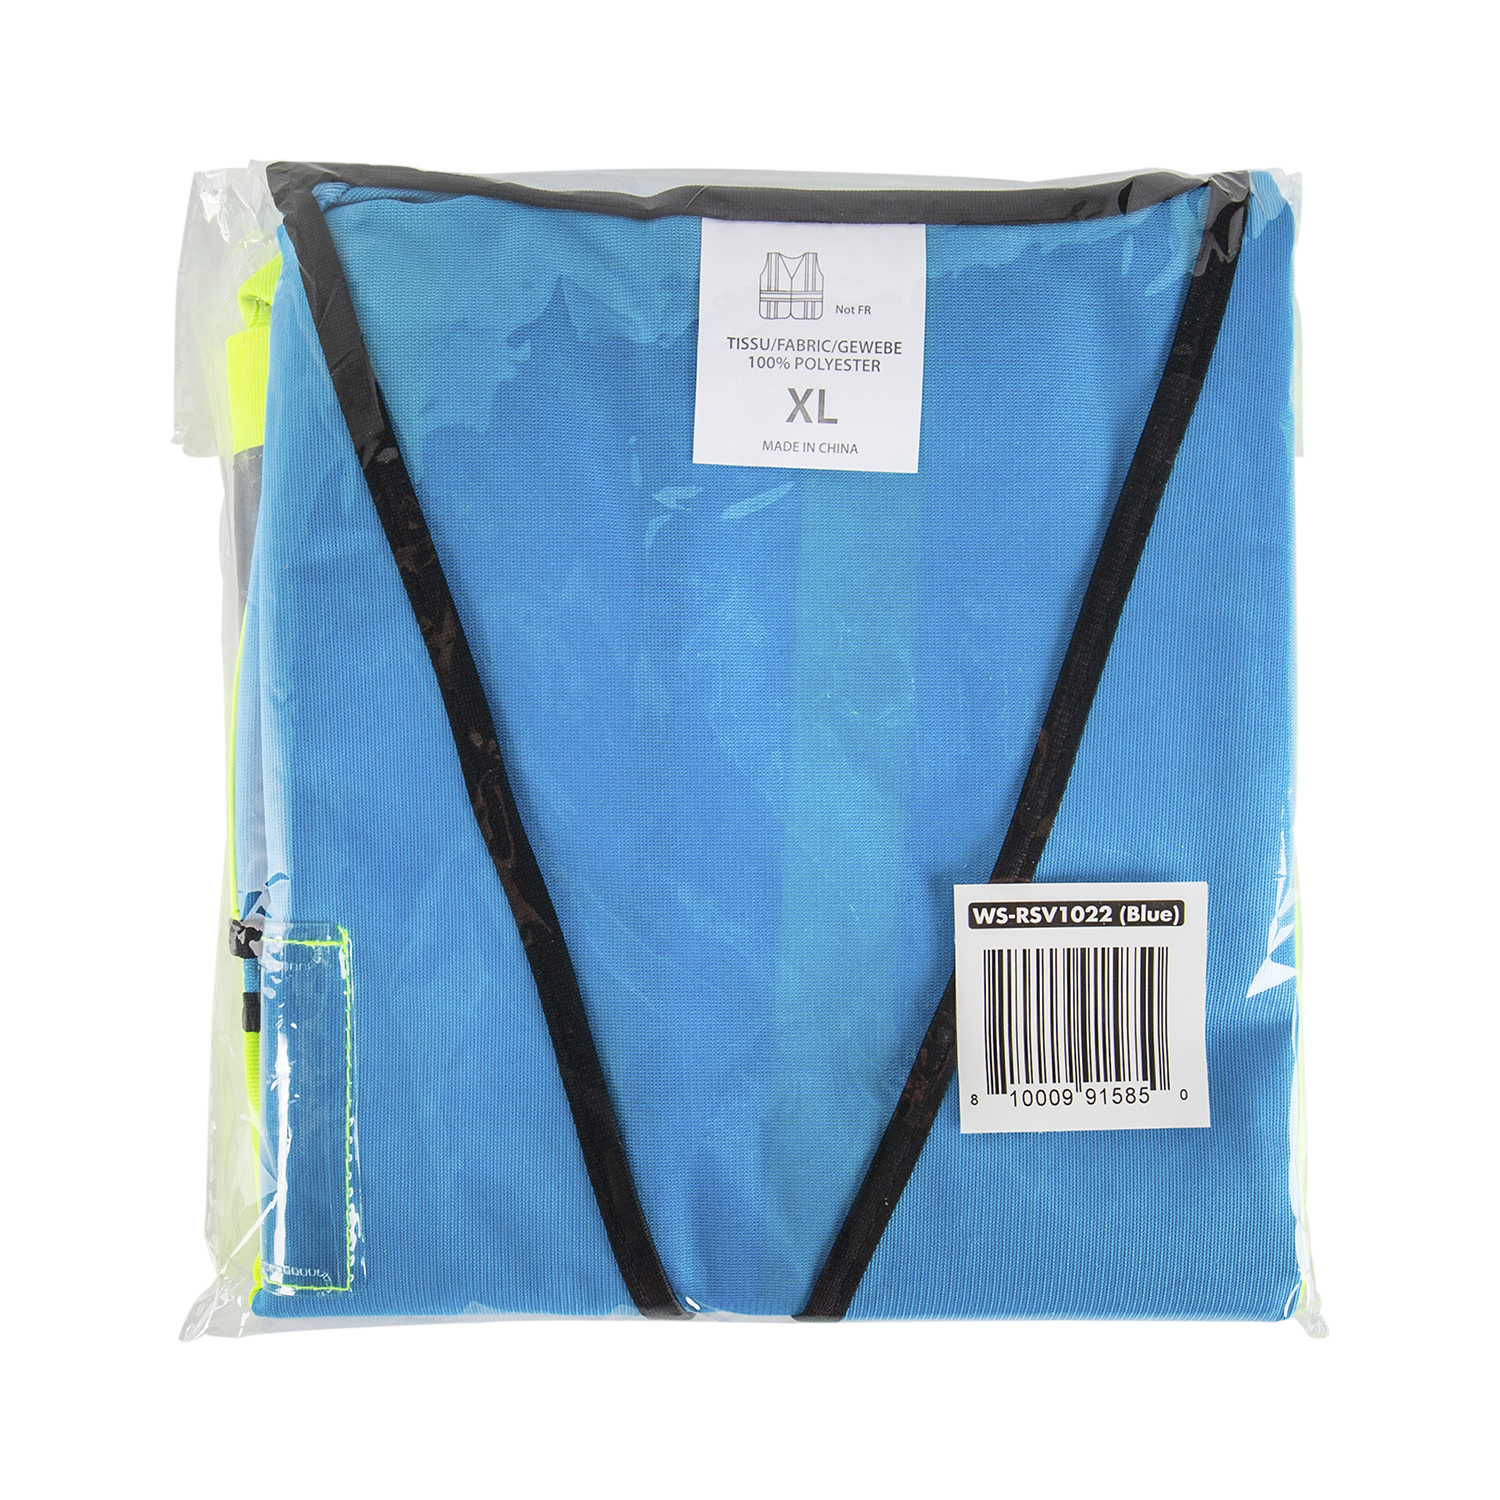 Karat High Visibility Reflective Safety Vest with Zipper Fastening (Blue), X-Large - 1 pc